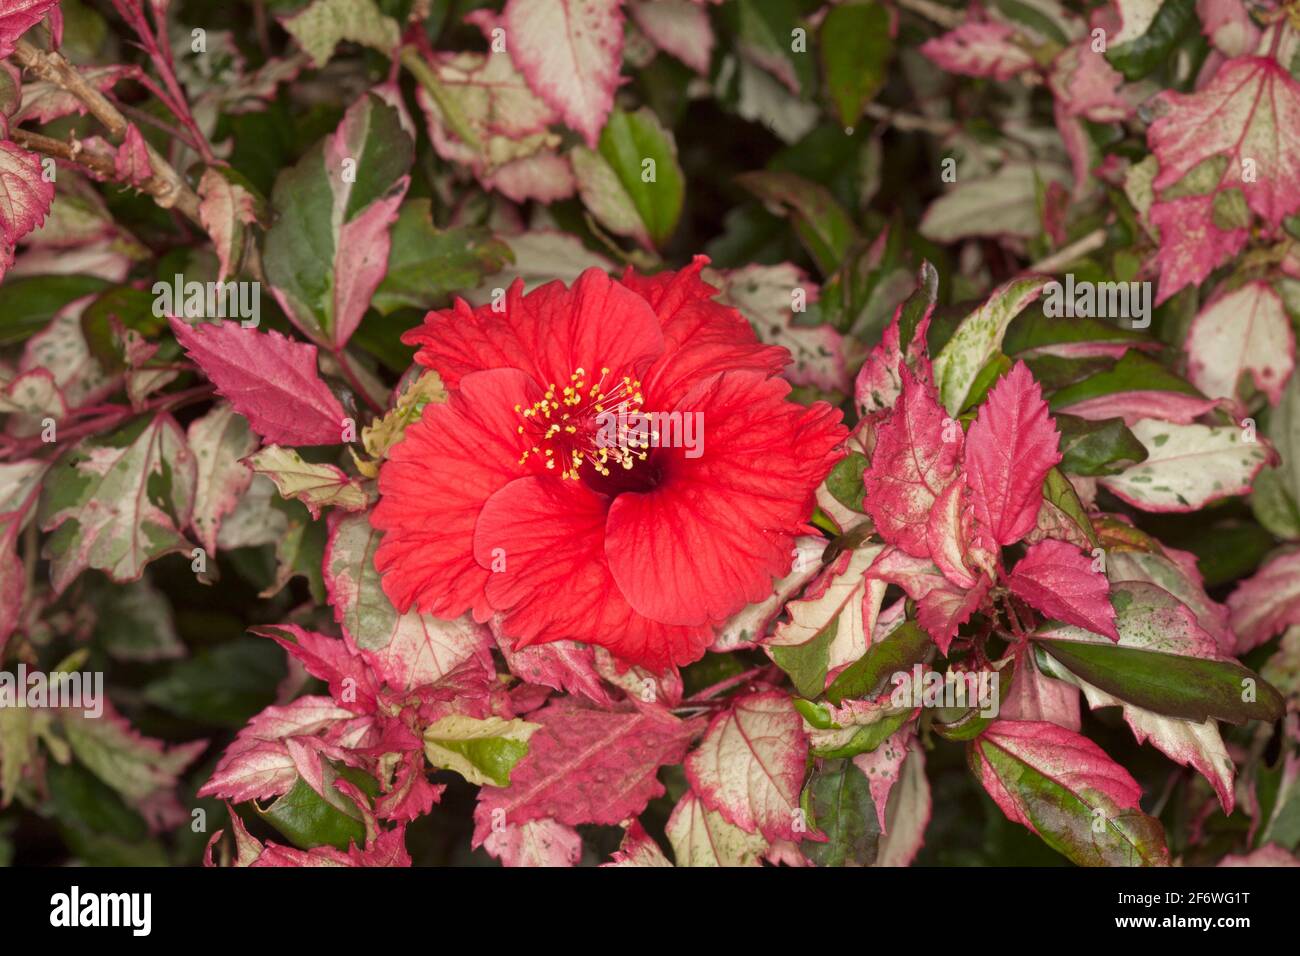 Drought tolerant garden shrub, Hibiscus 'Snowflake', with bright red flower against background of variegated red, green and white leaves Stock Photo